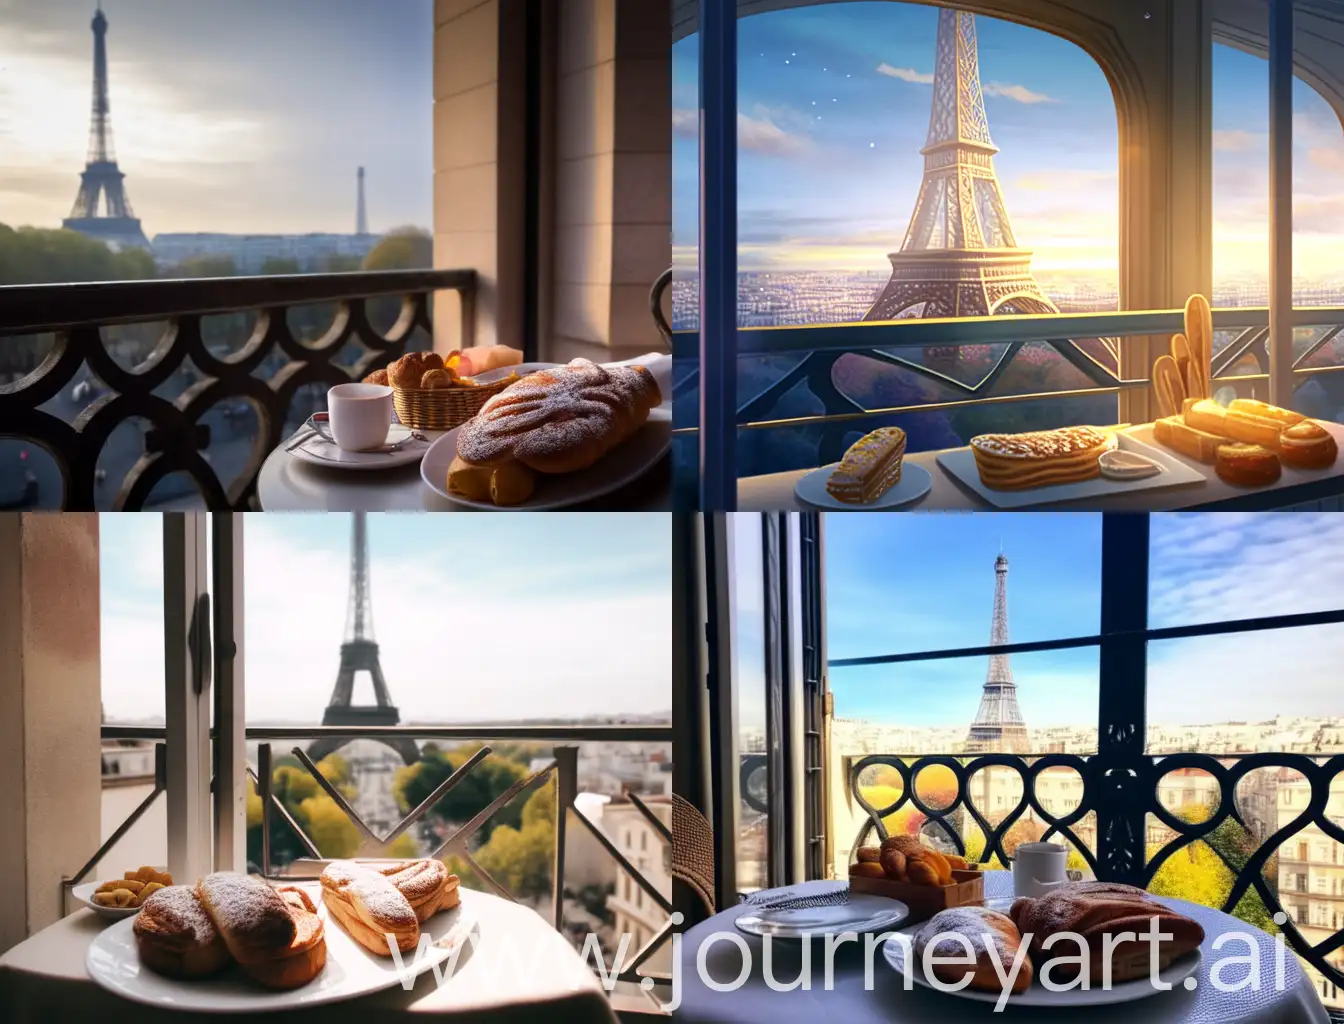 Fresh-Baked-Bread-with-a-View-of-the-Eiffel-Tower